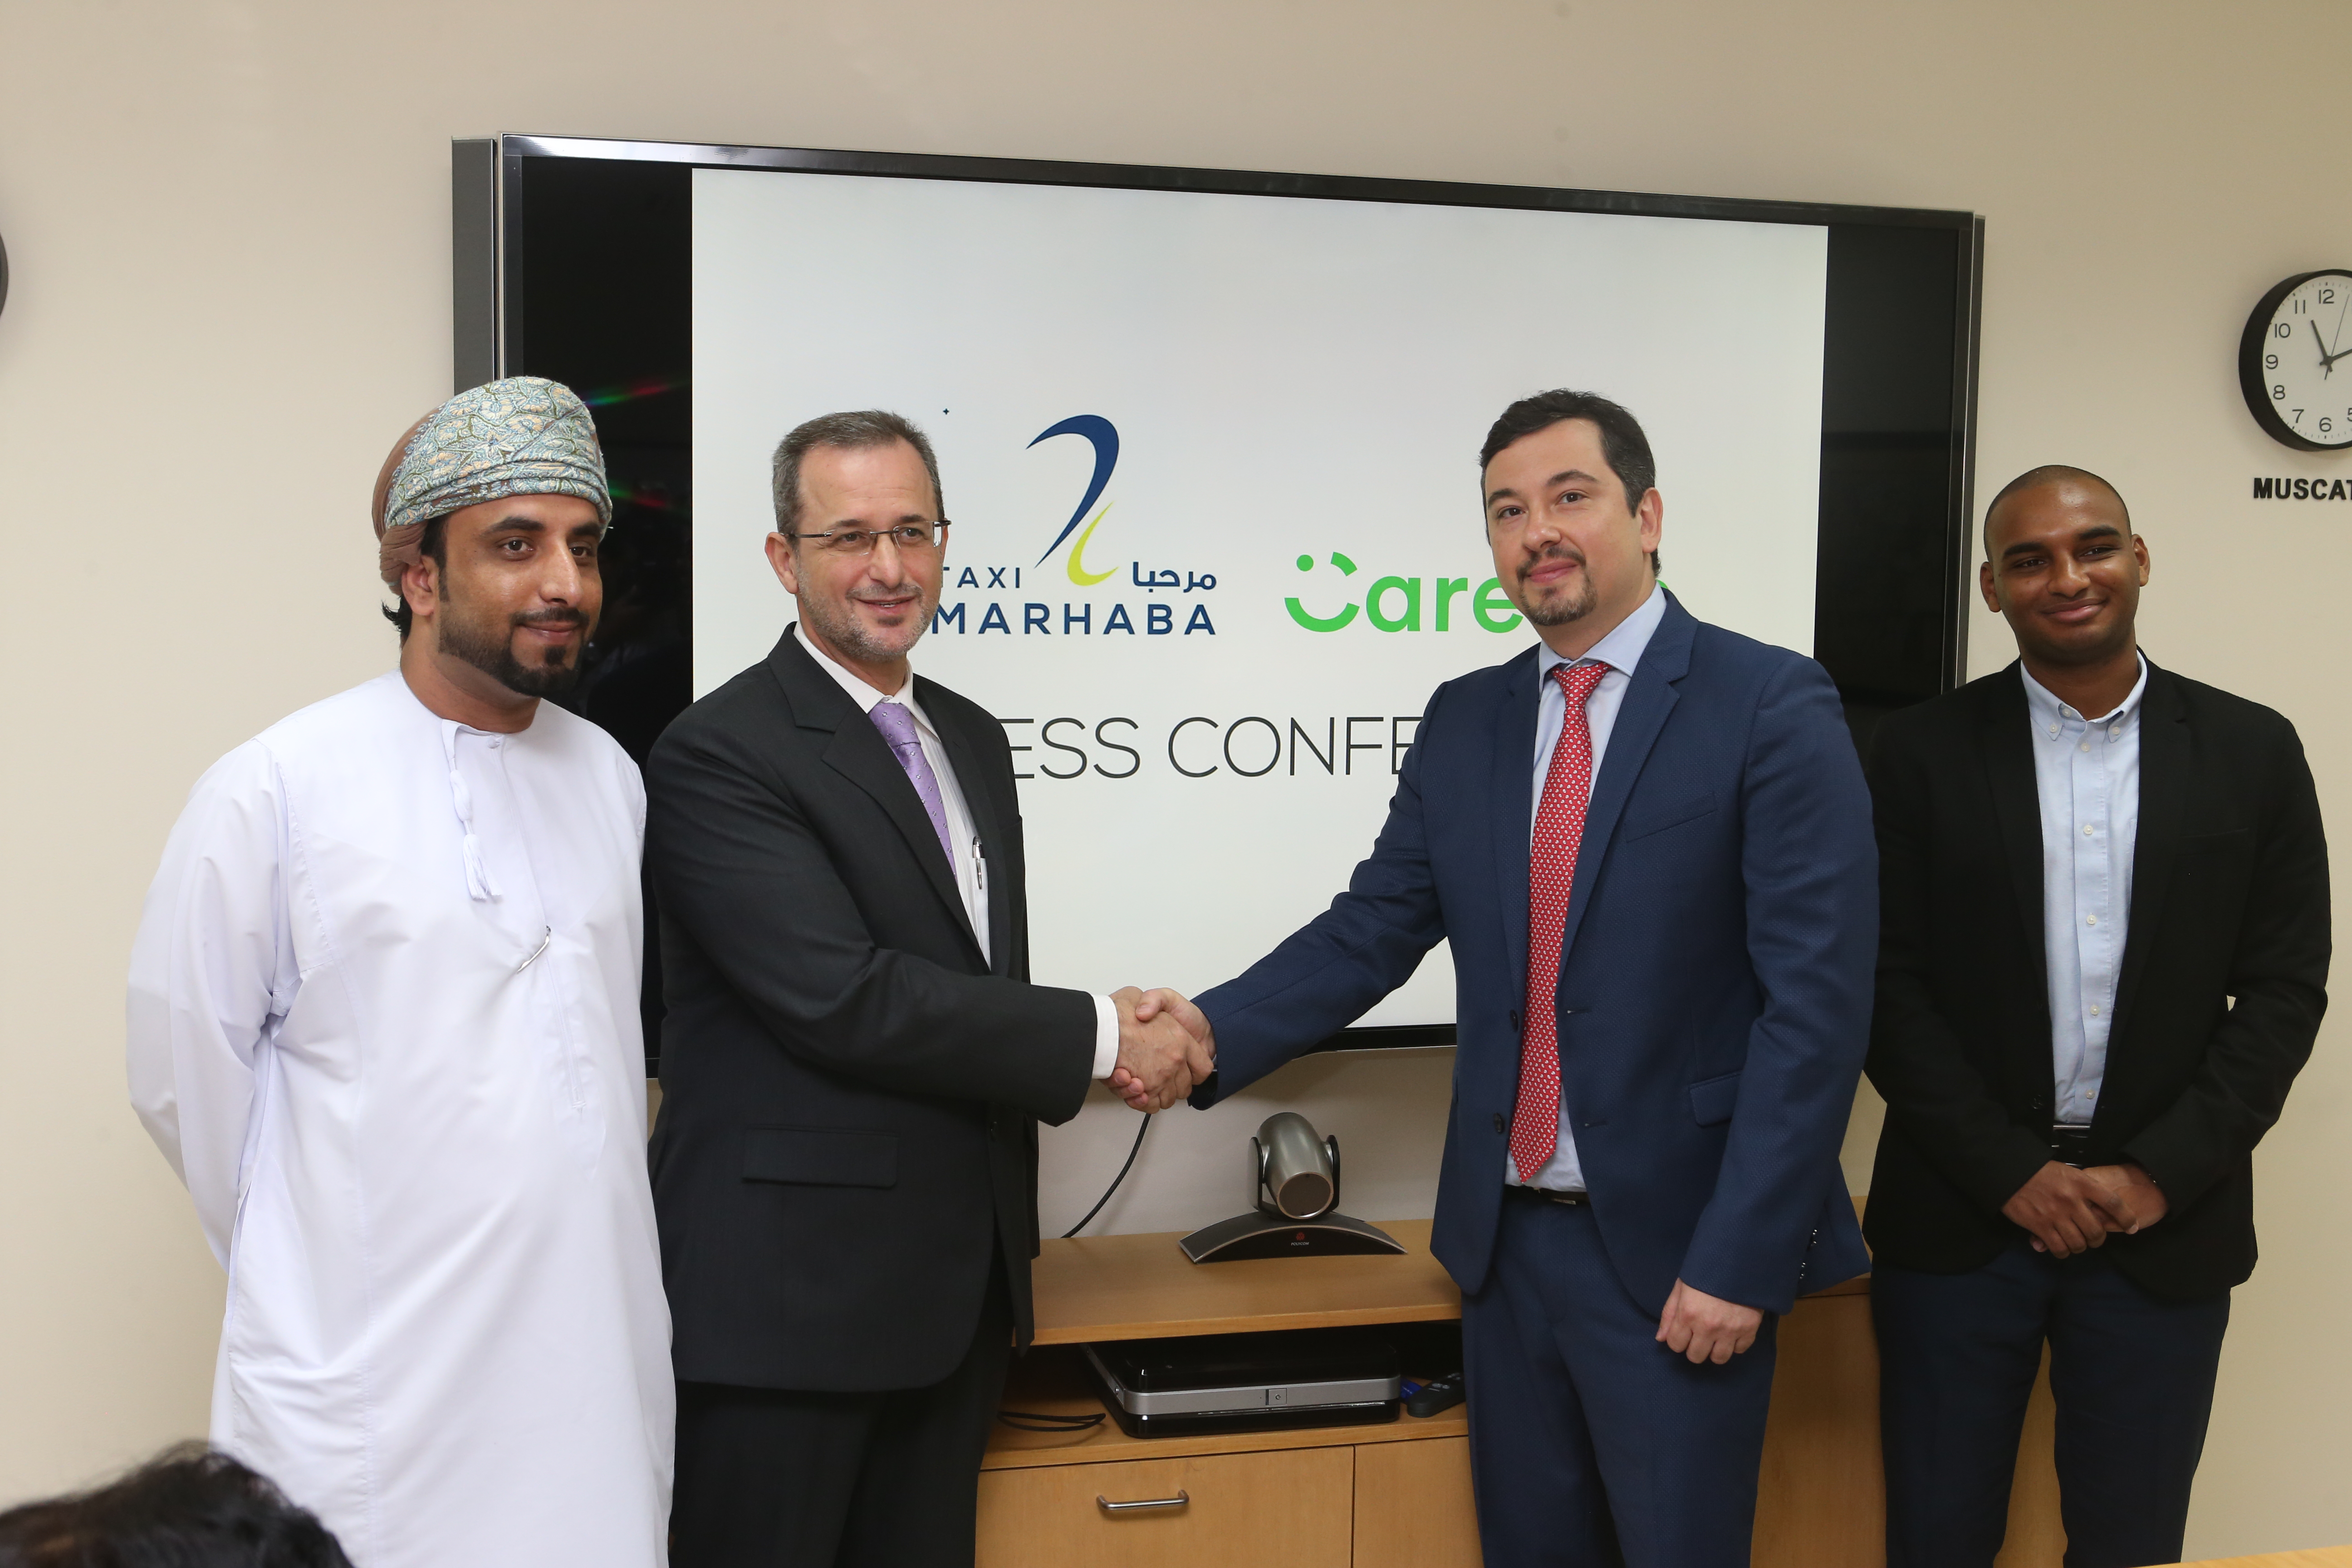 Careem inks pact with Marhaba for taxi services in Muscat